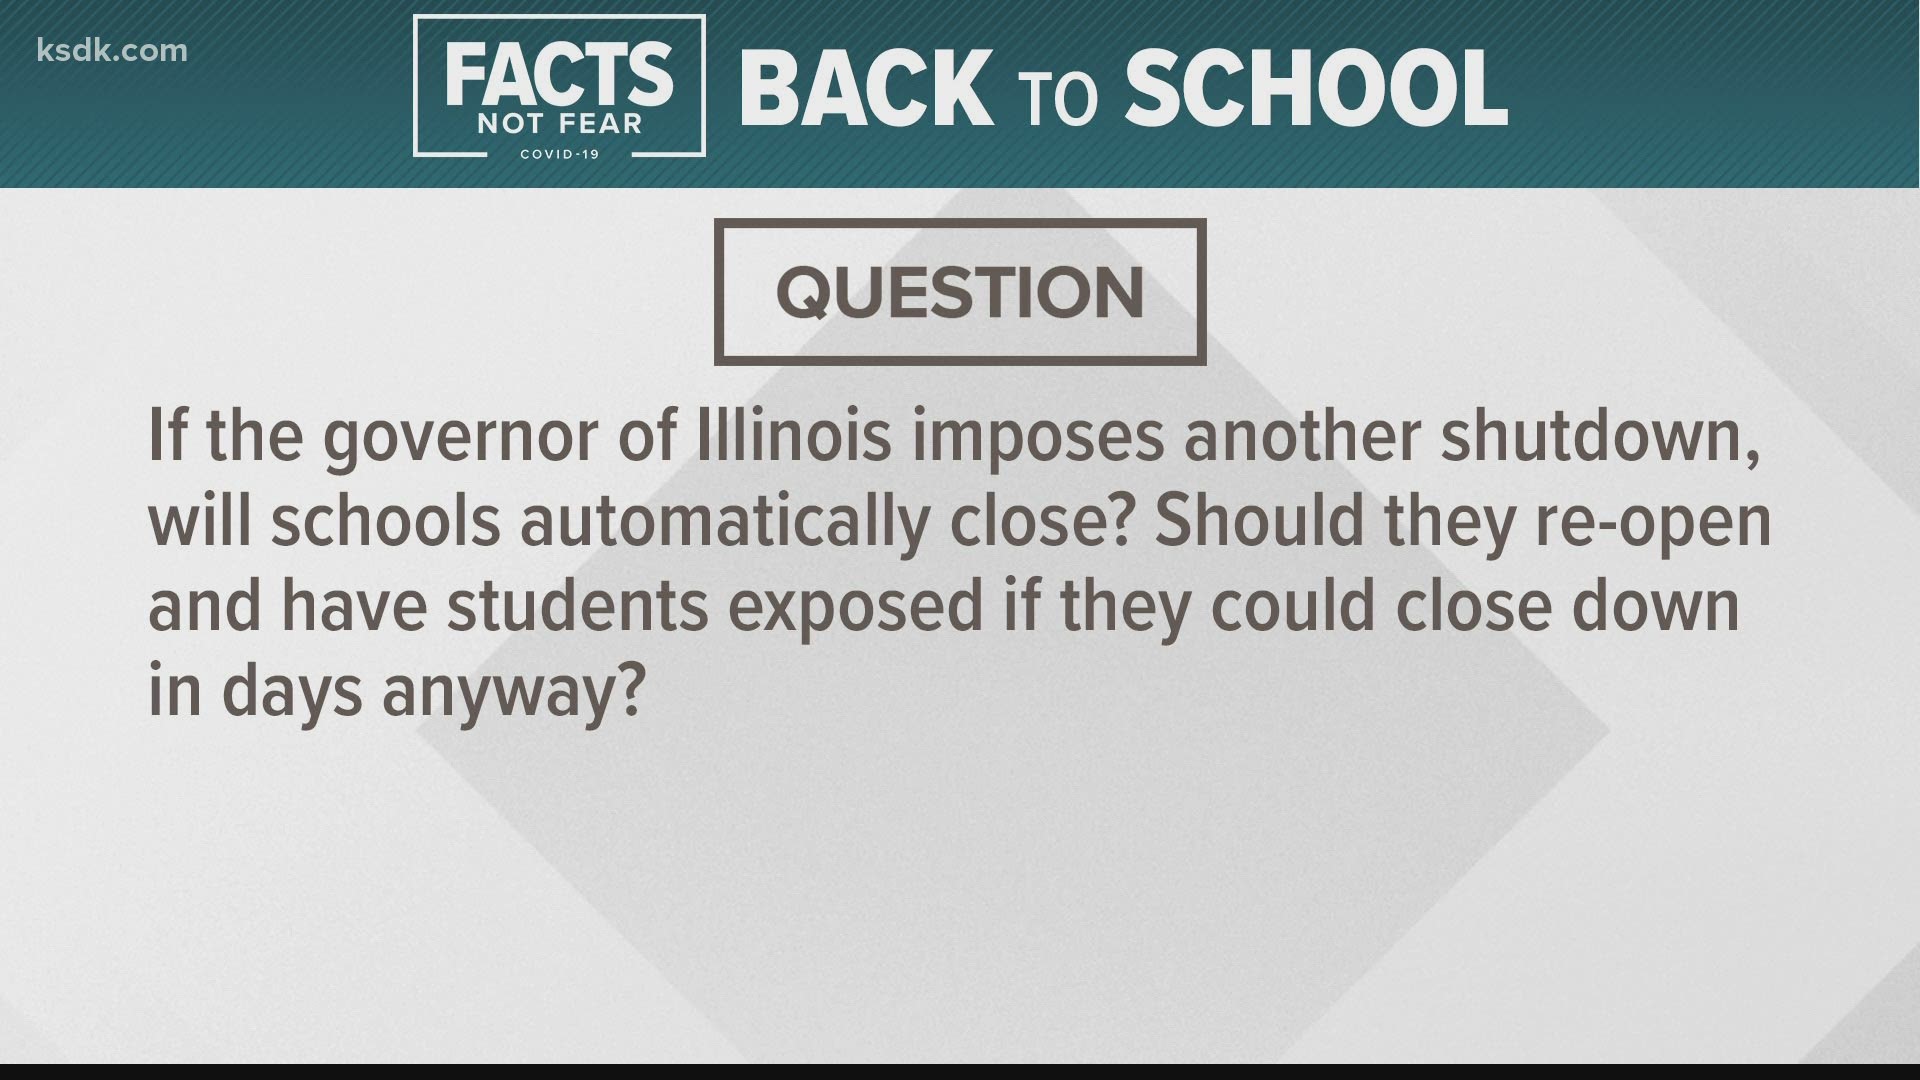 5 On Your Side has partnered with EducationPlus to answer your back-to-school questions.